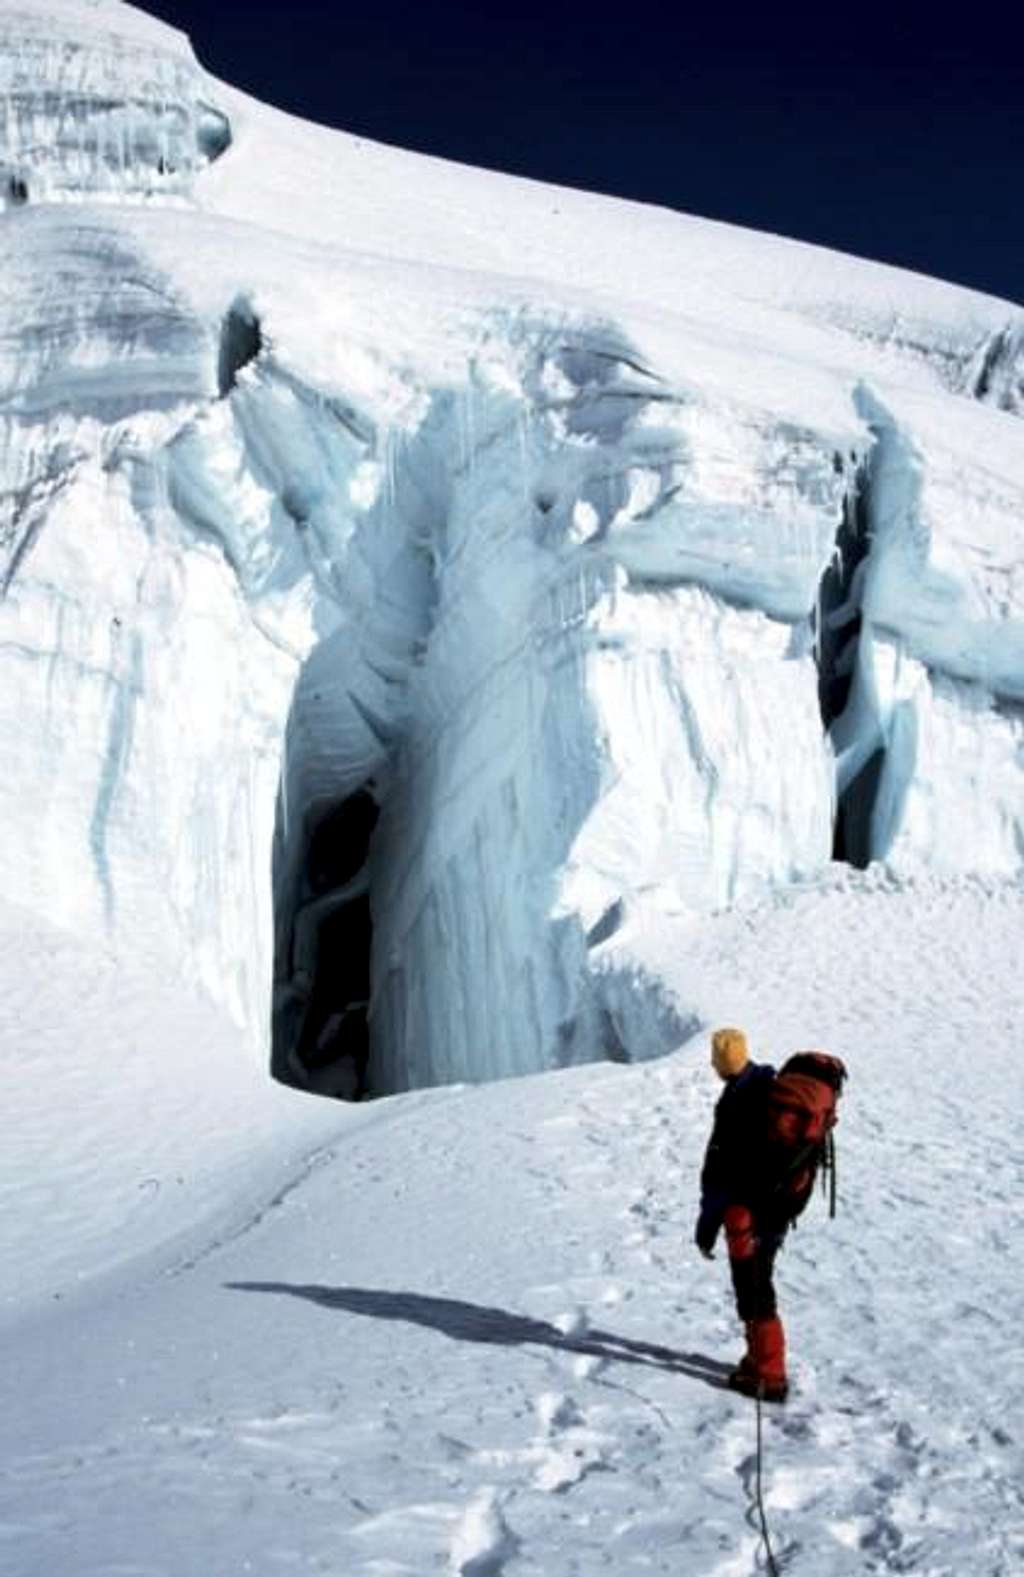 And yes, there are crevasses...